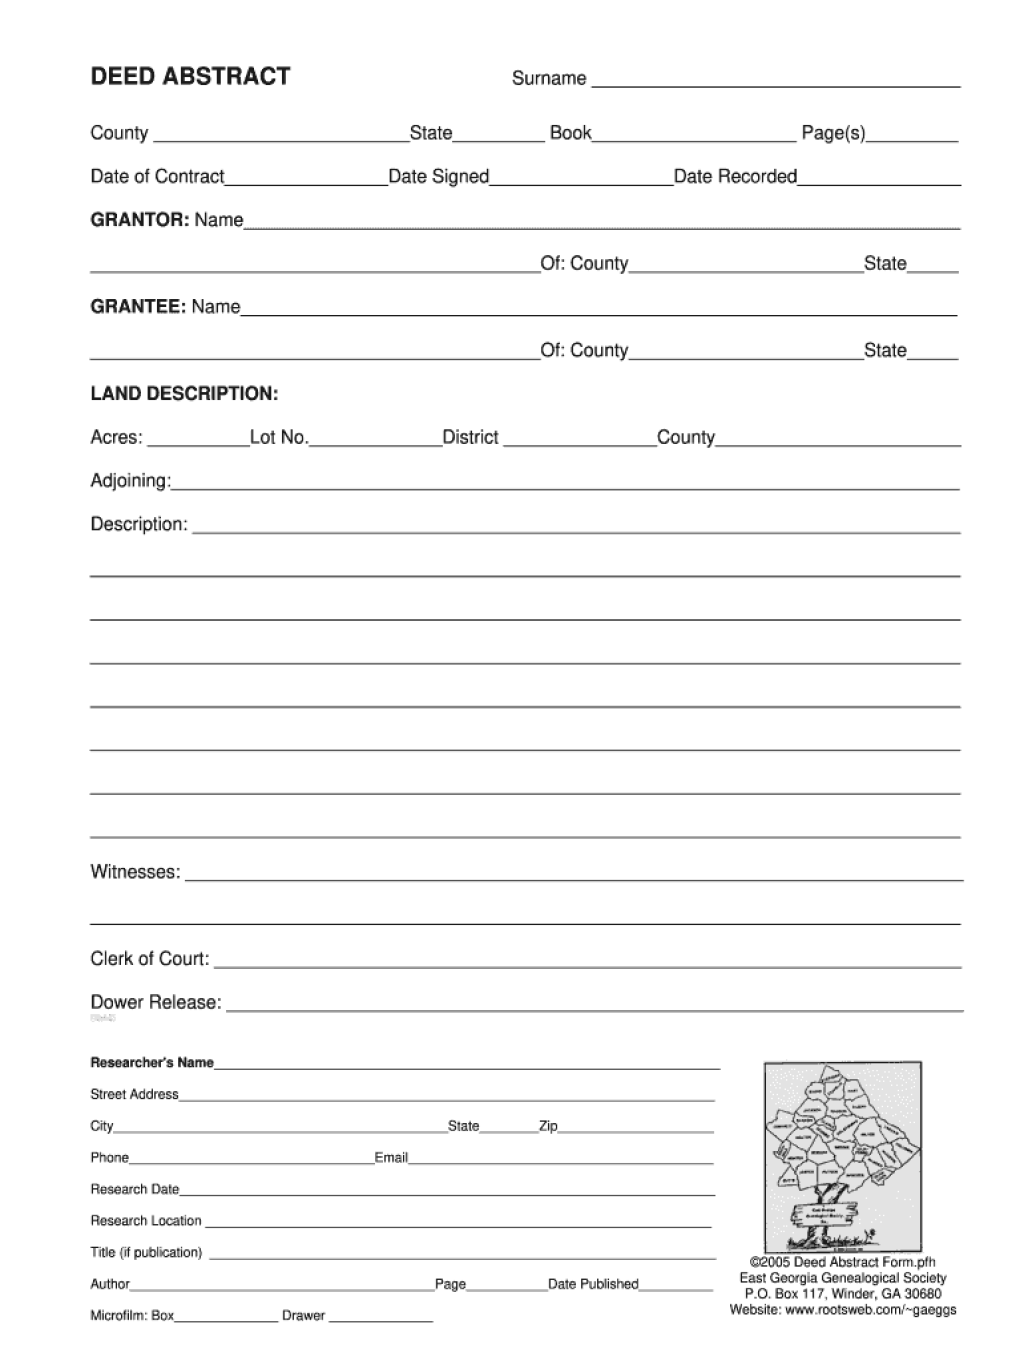 Picture of: Abstract deed: Fill out & sign online  DocHub